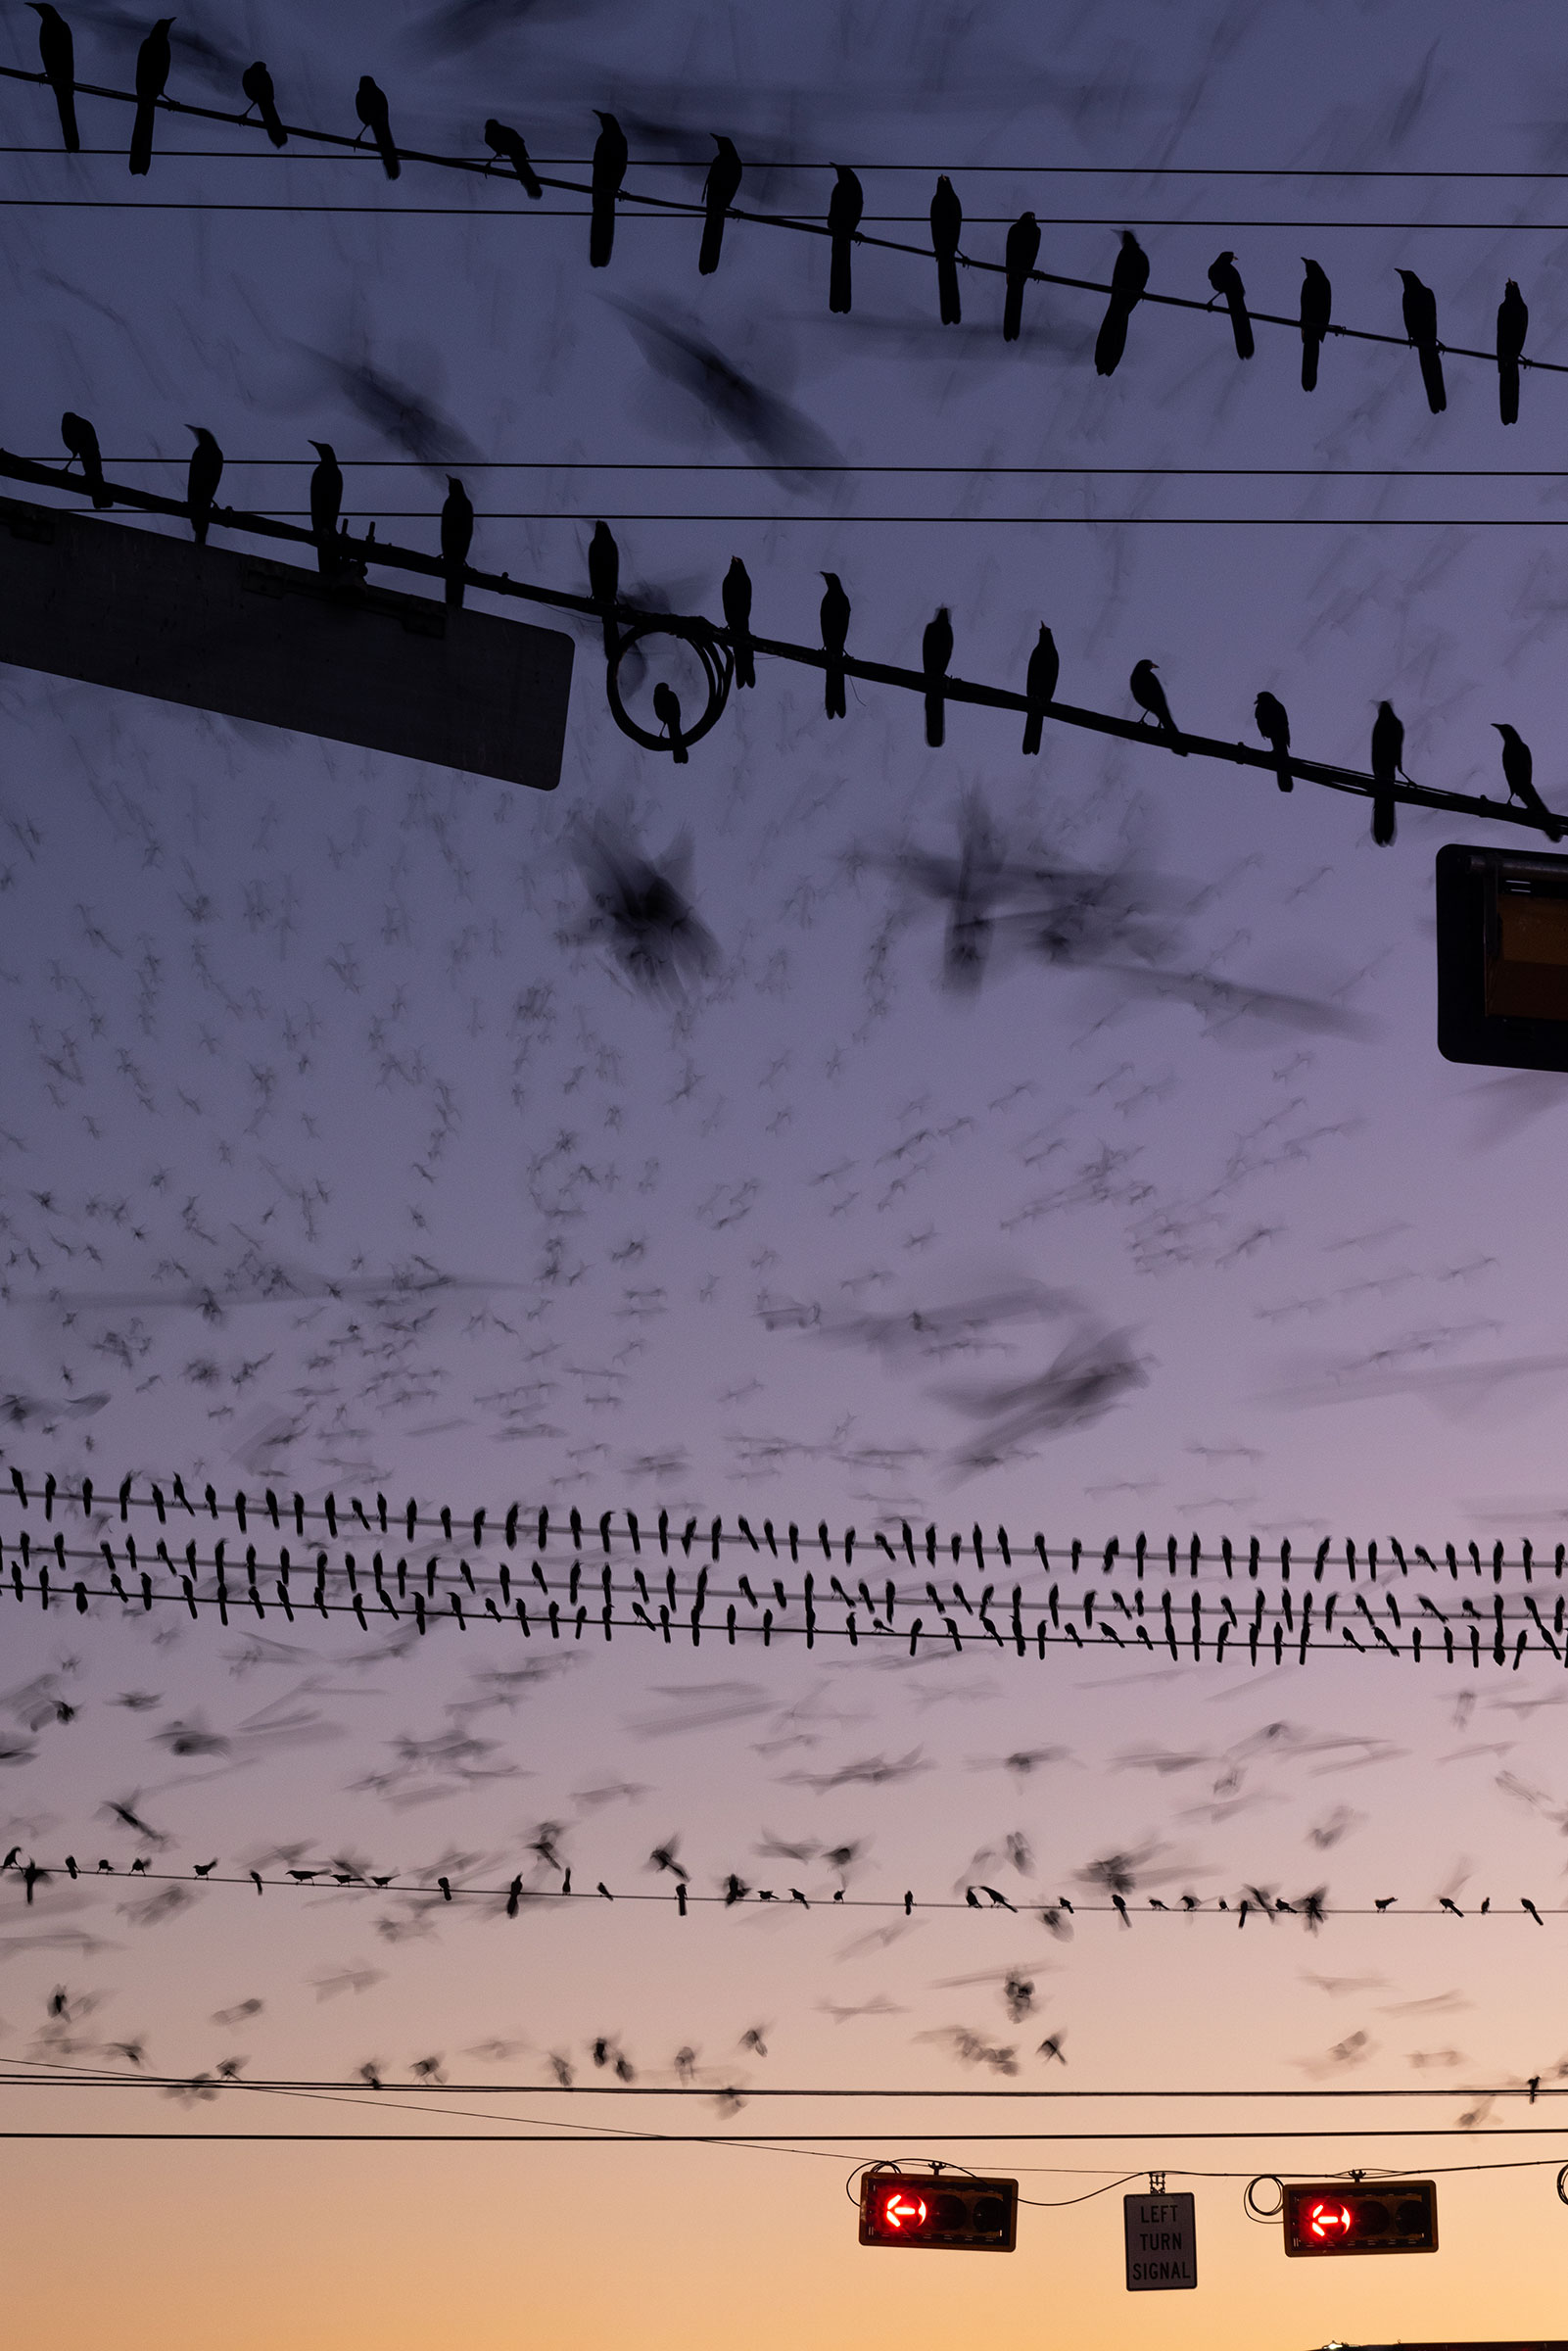 Silhouetted grackles perch on power lines that bisect the image, with their tails nearly all pointing in the same direction. The sky is purple and pink. Through the whole of the photo are blurry figures of grackles flying through the air.